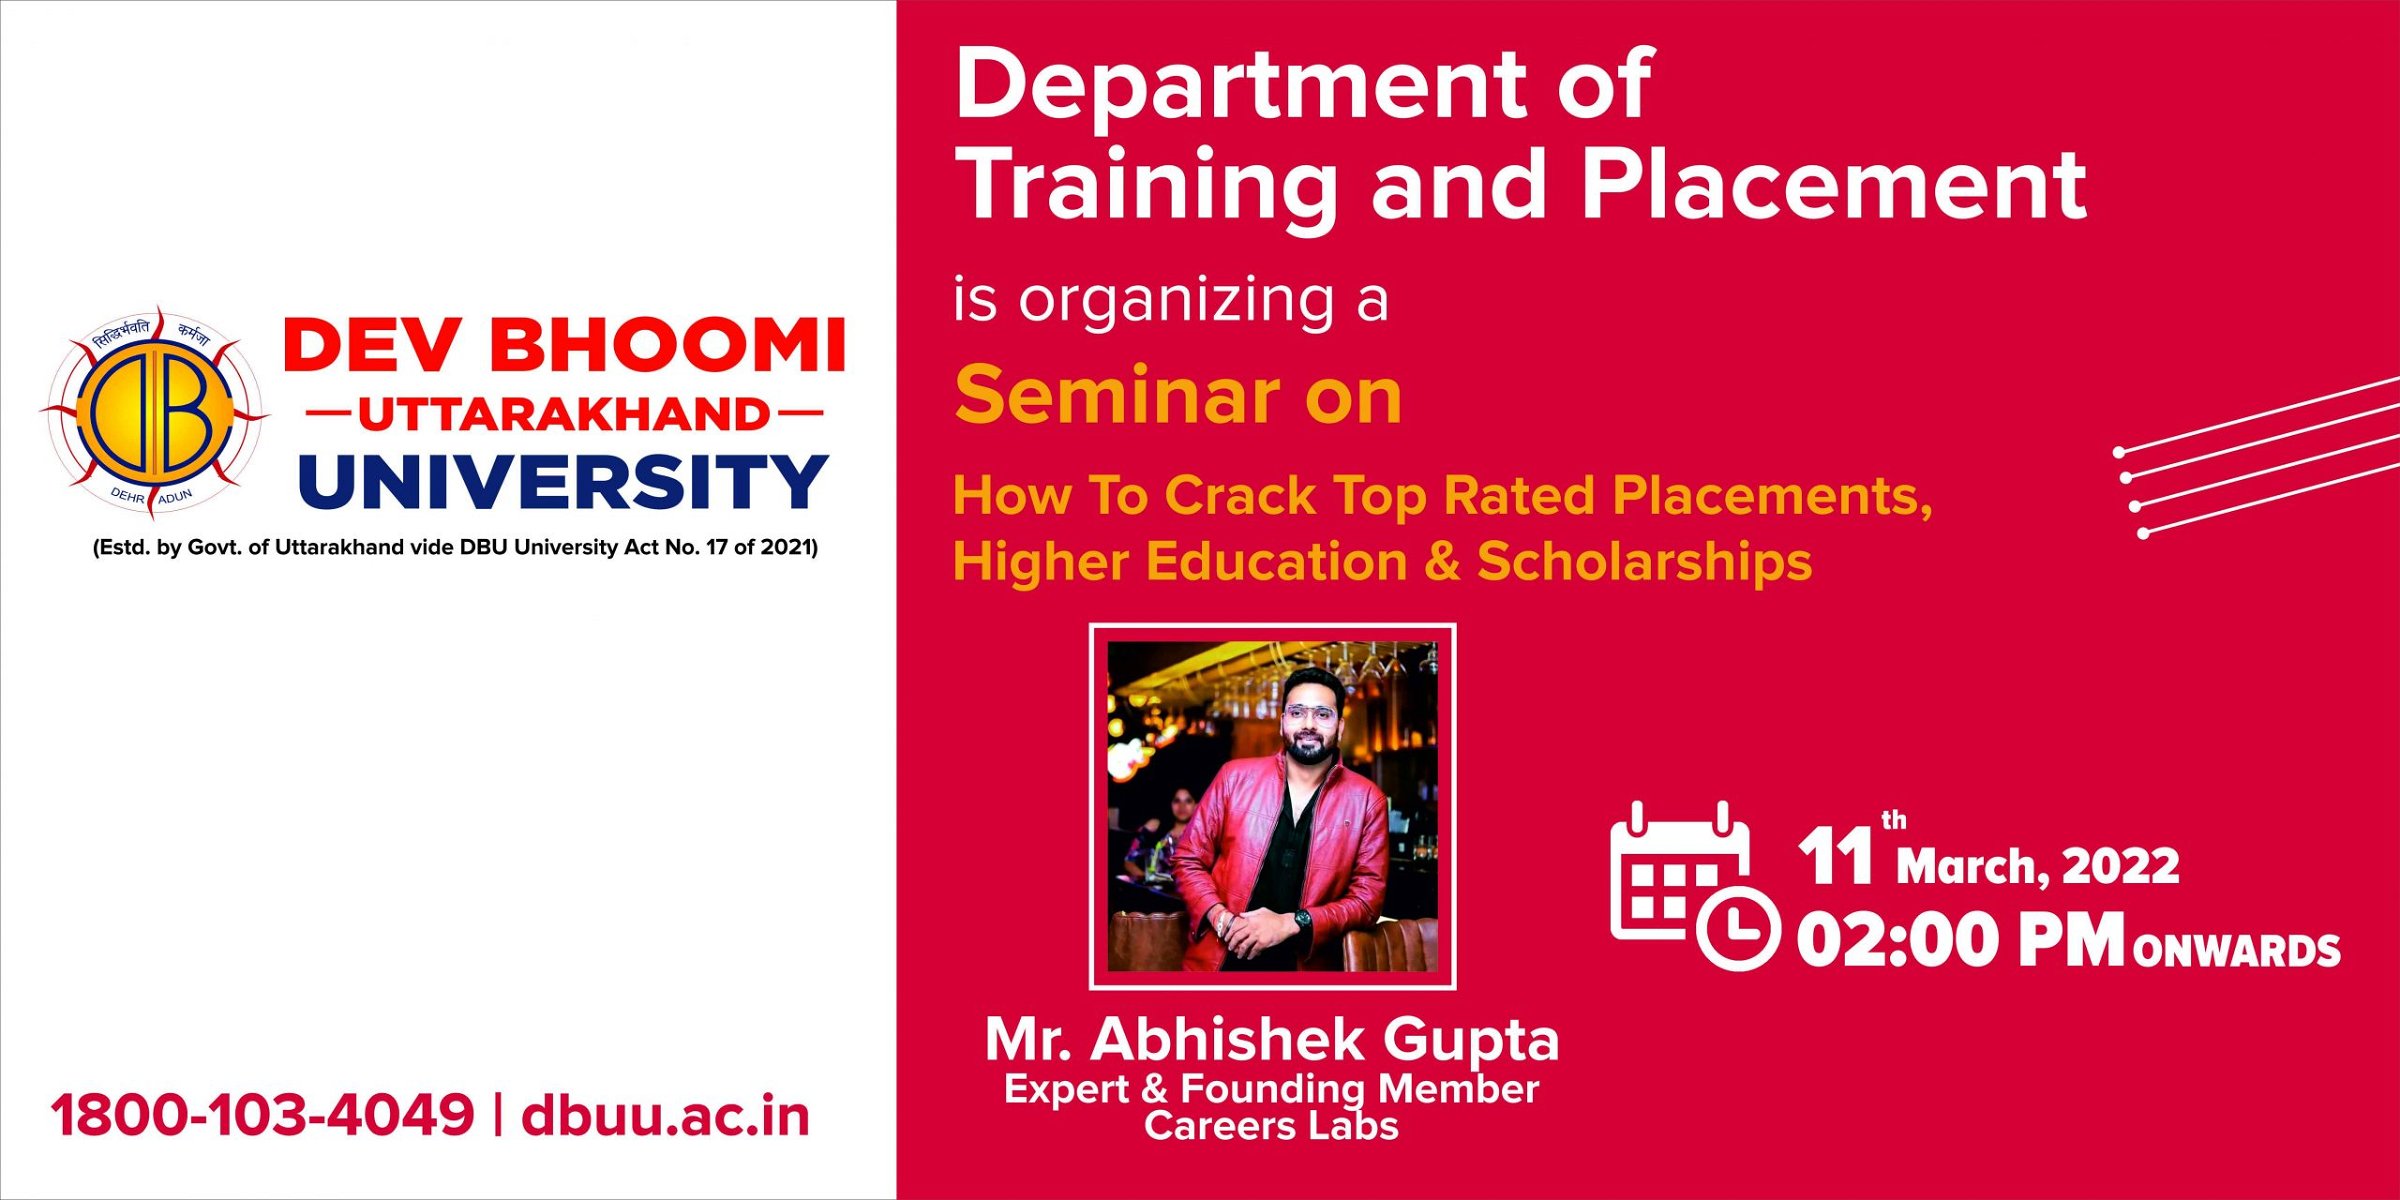 Seminar on “How To Crack Top Rated Placements , Higher Education & Scholarships”.